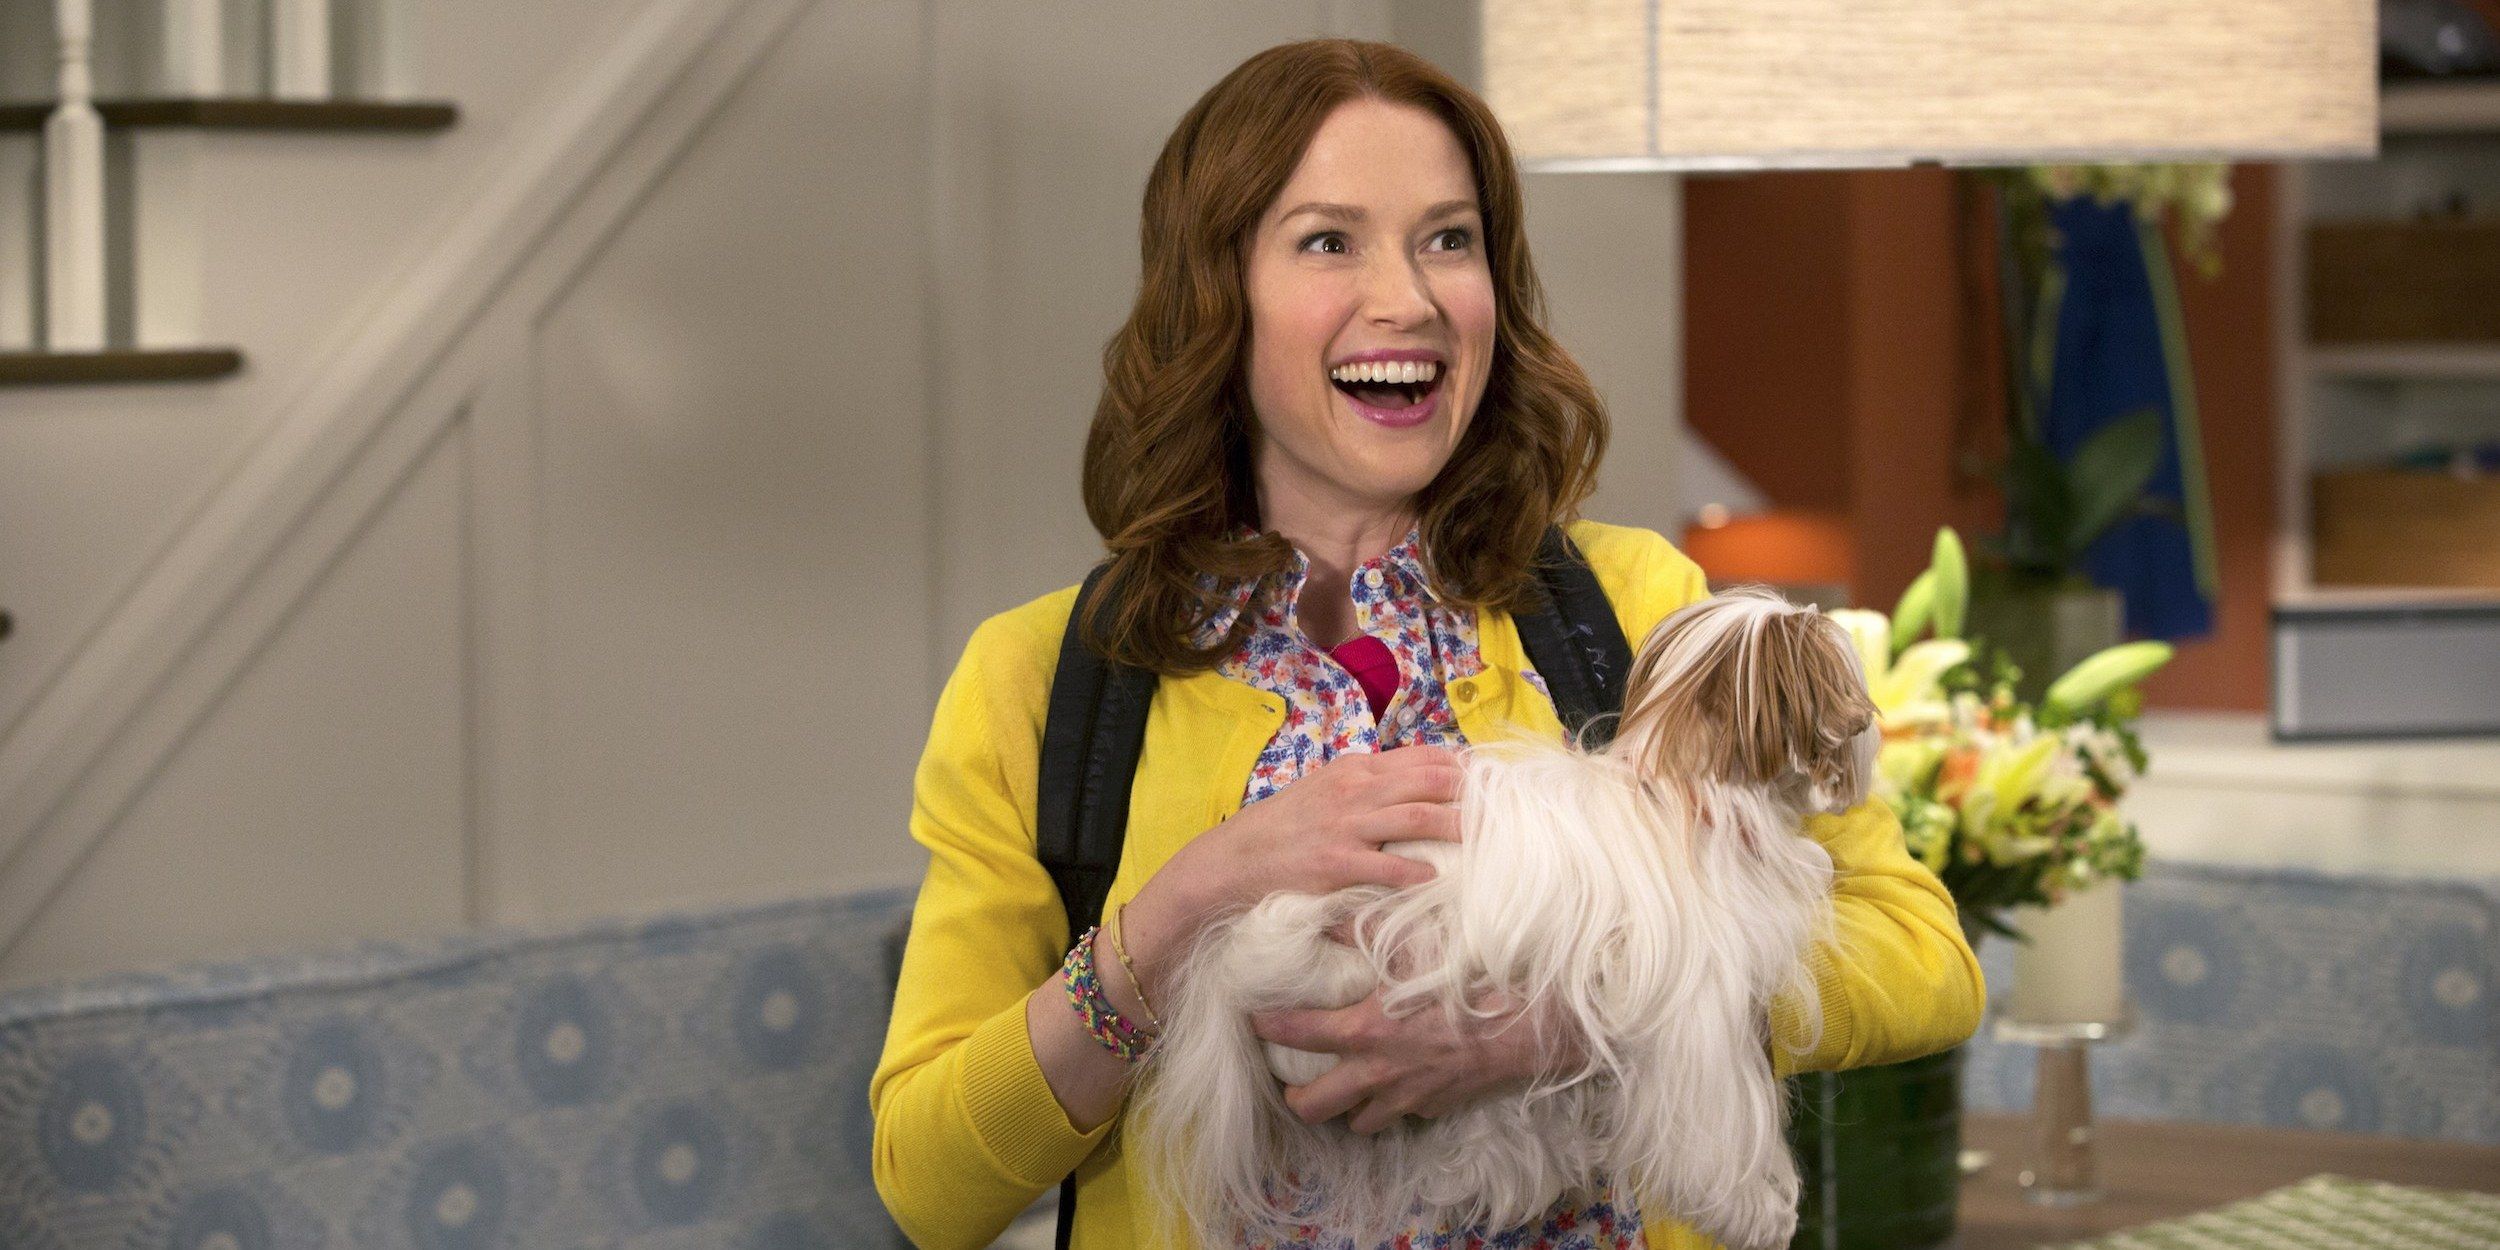 Kimmy holding a dog and smiling in Unbreakable Kimmy Schmidt